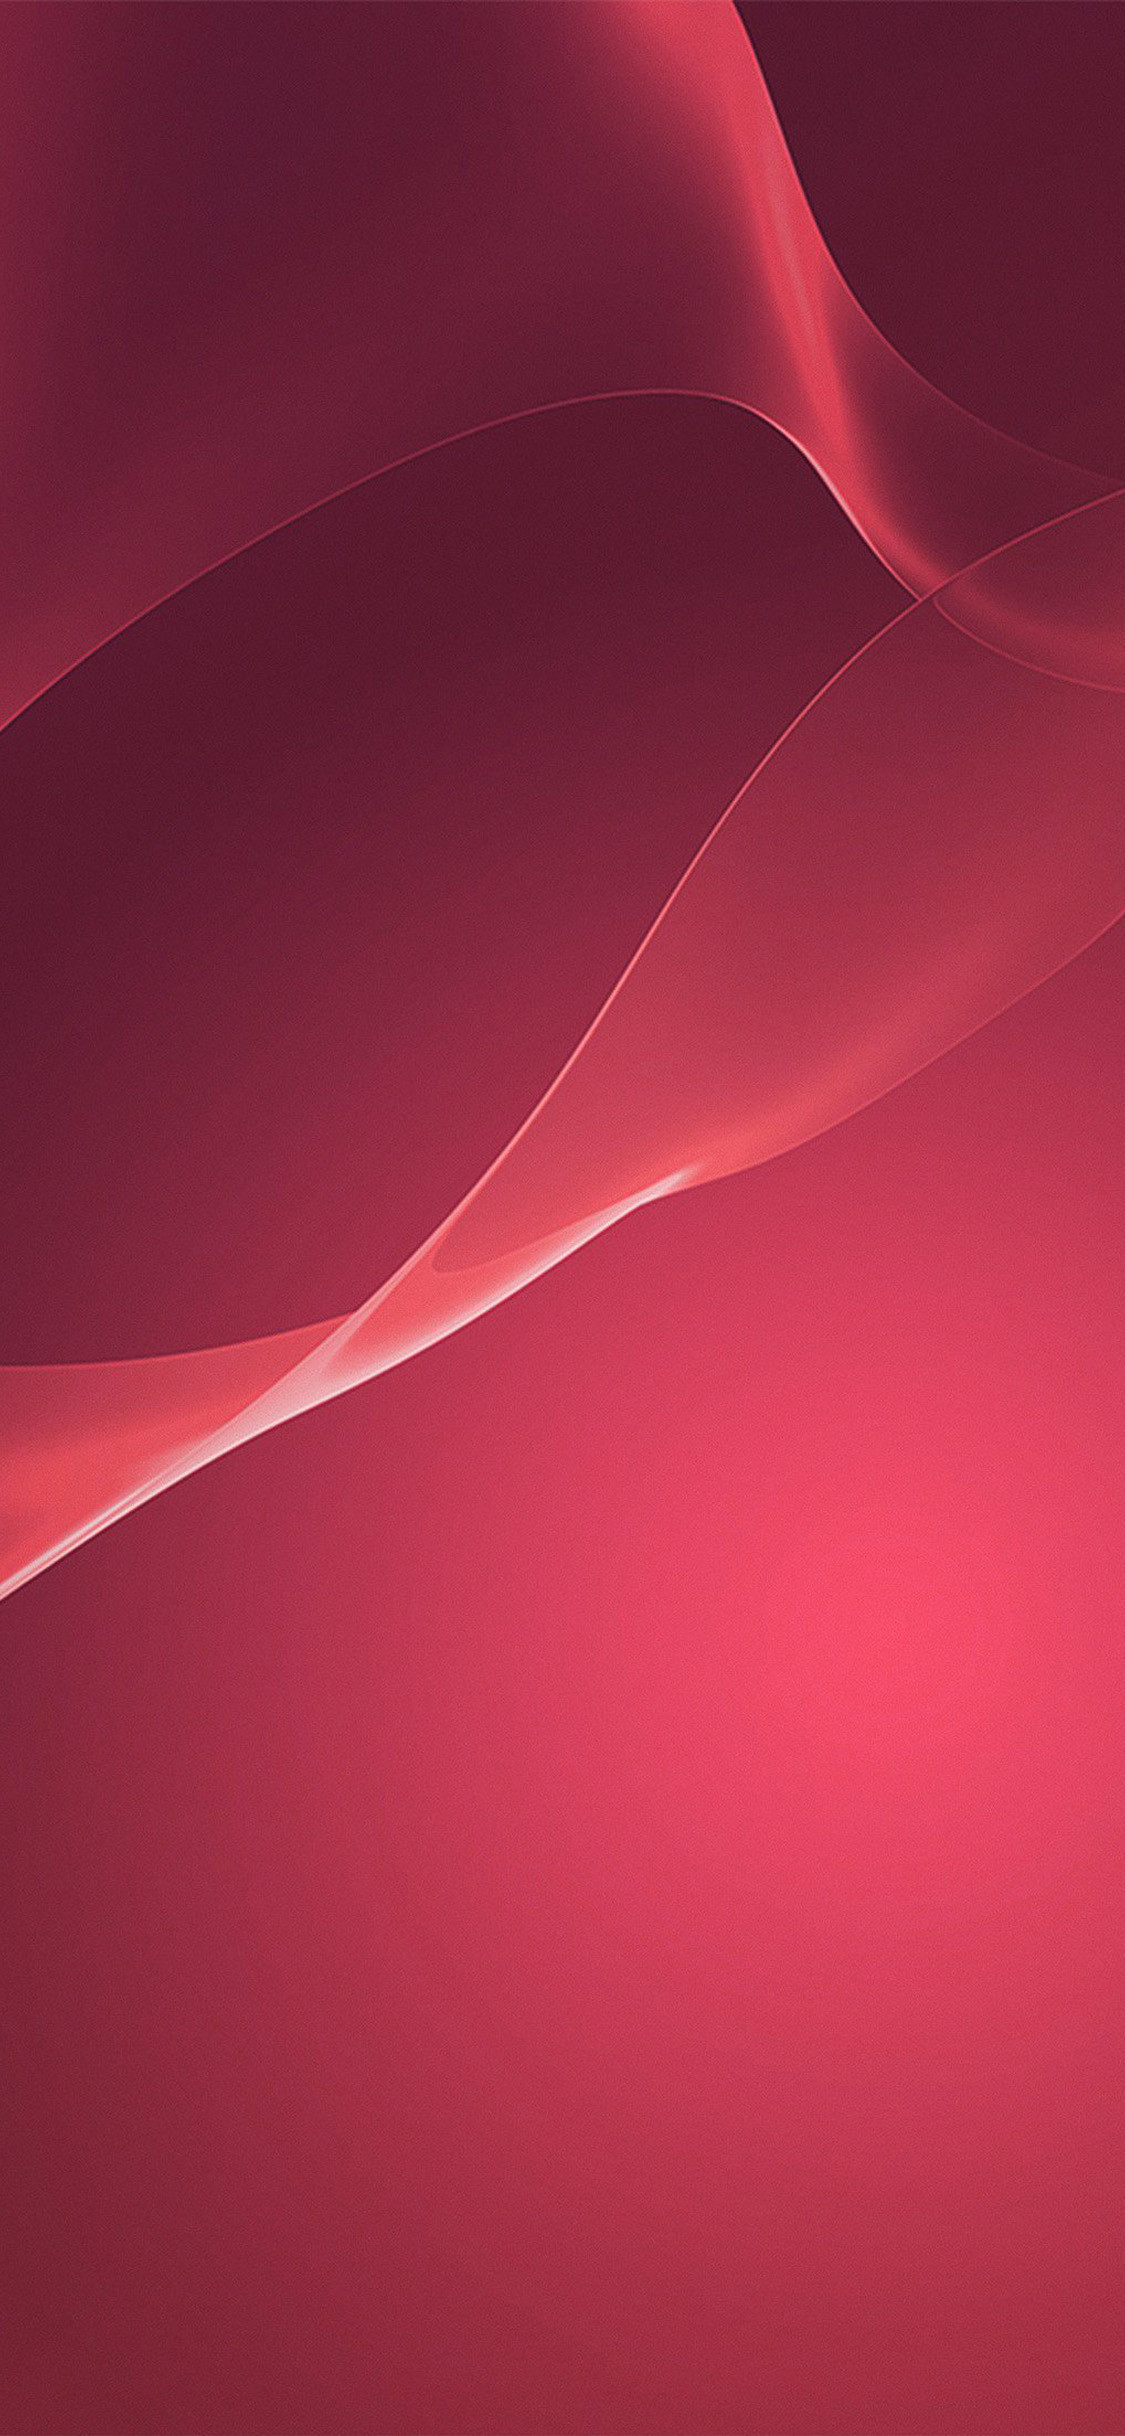 86 Red Iphone Wallpapers On Wallpaperplay - De Iphone X Red - HD Wallpaper 